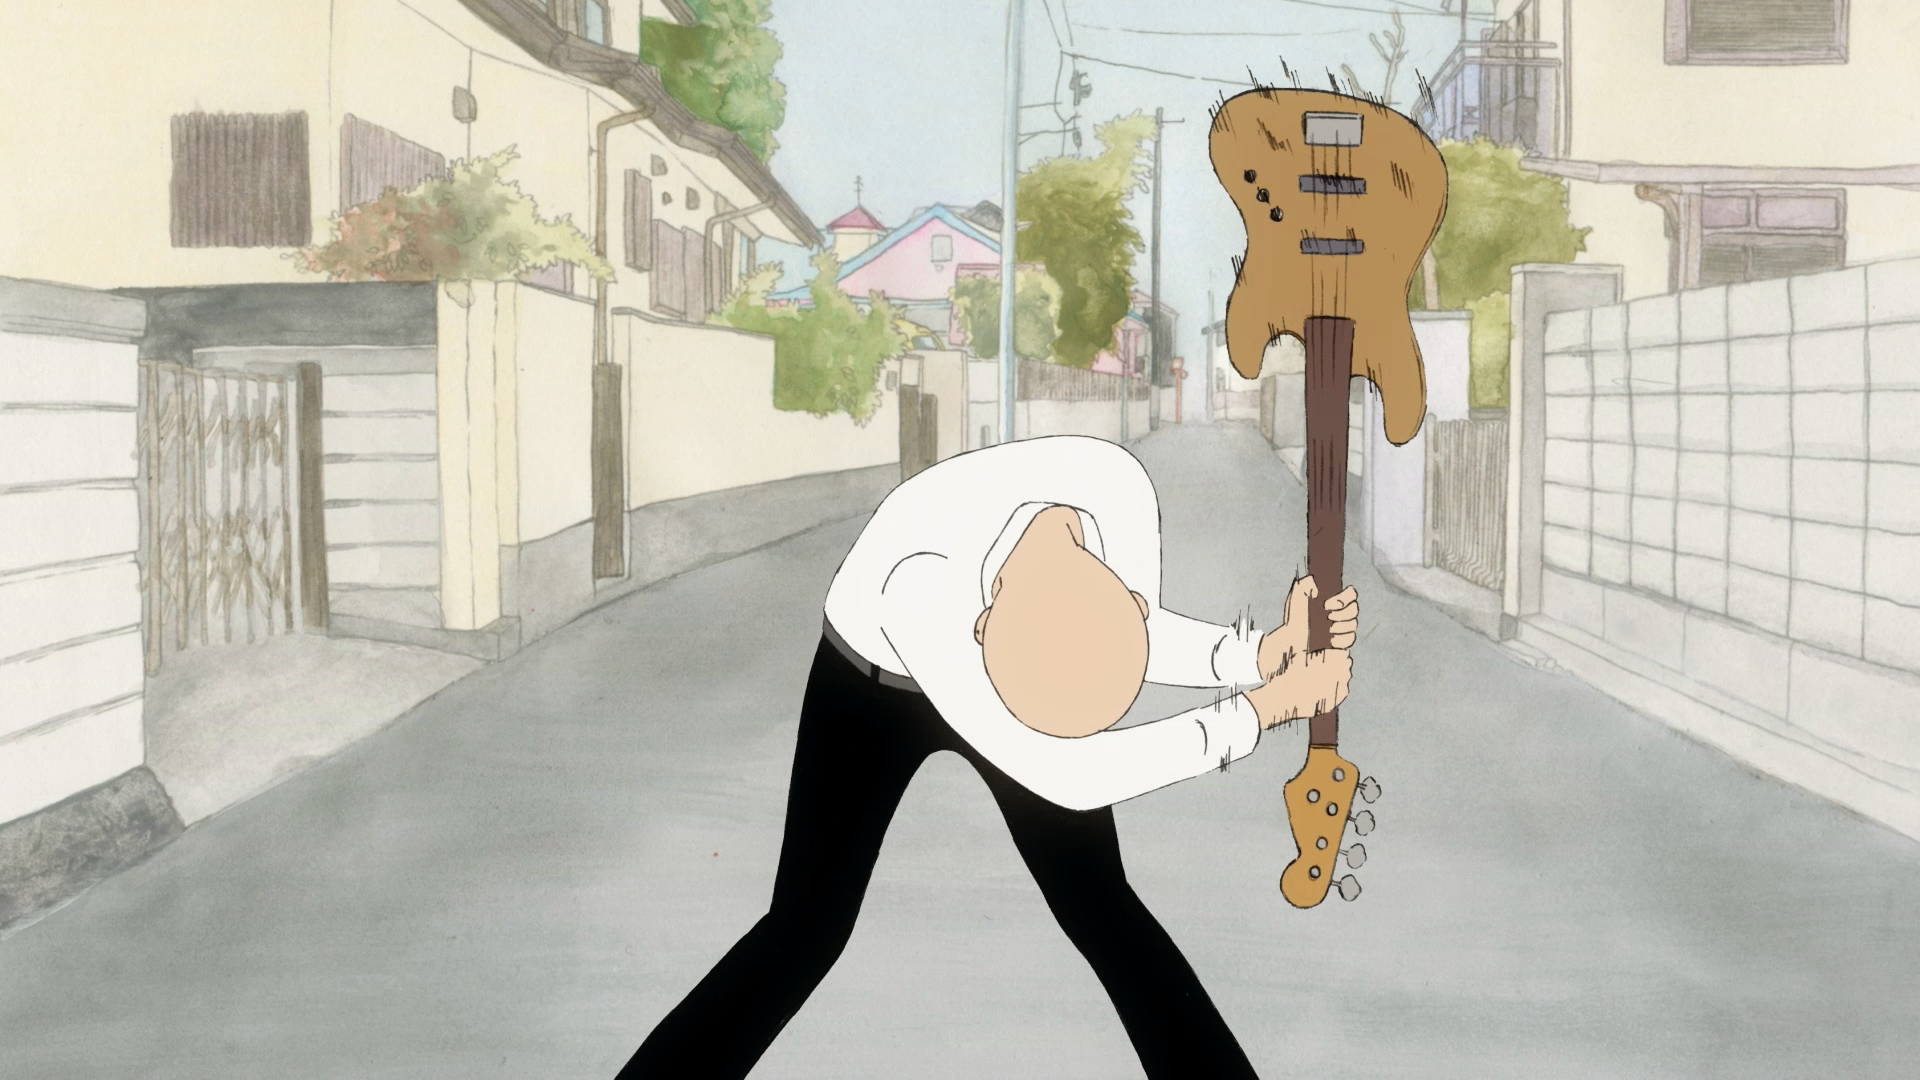 In an act of defiance reminiscent of the cover of the London Calling album by the Clash, Kenji smashes his bass guitar to pieces in a scene from the ON-GAKU: Our Sound theatrical anime film.